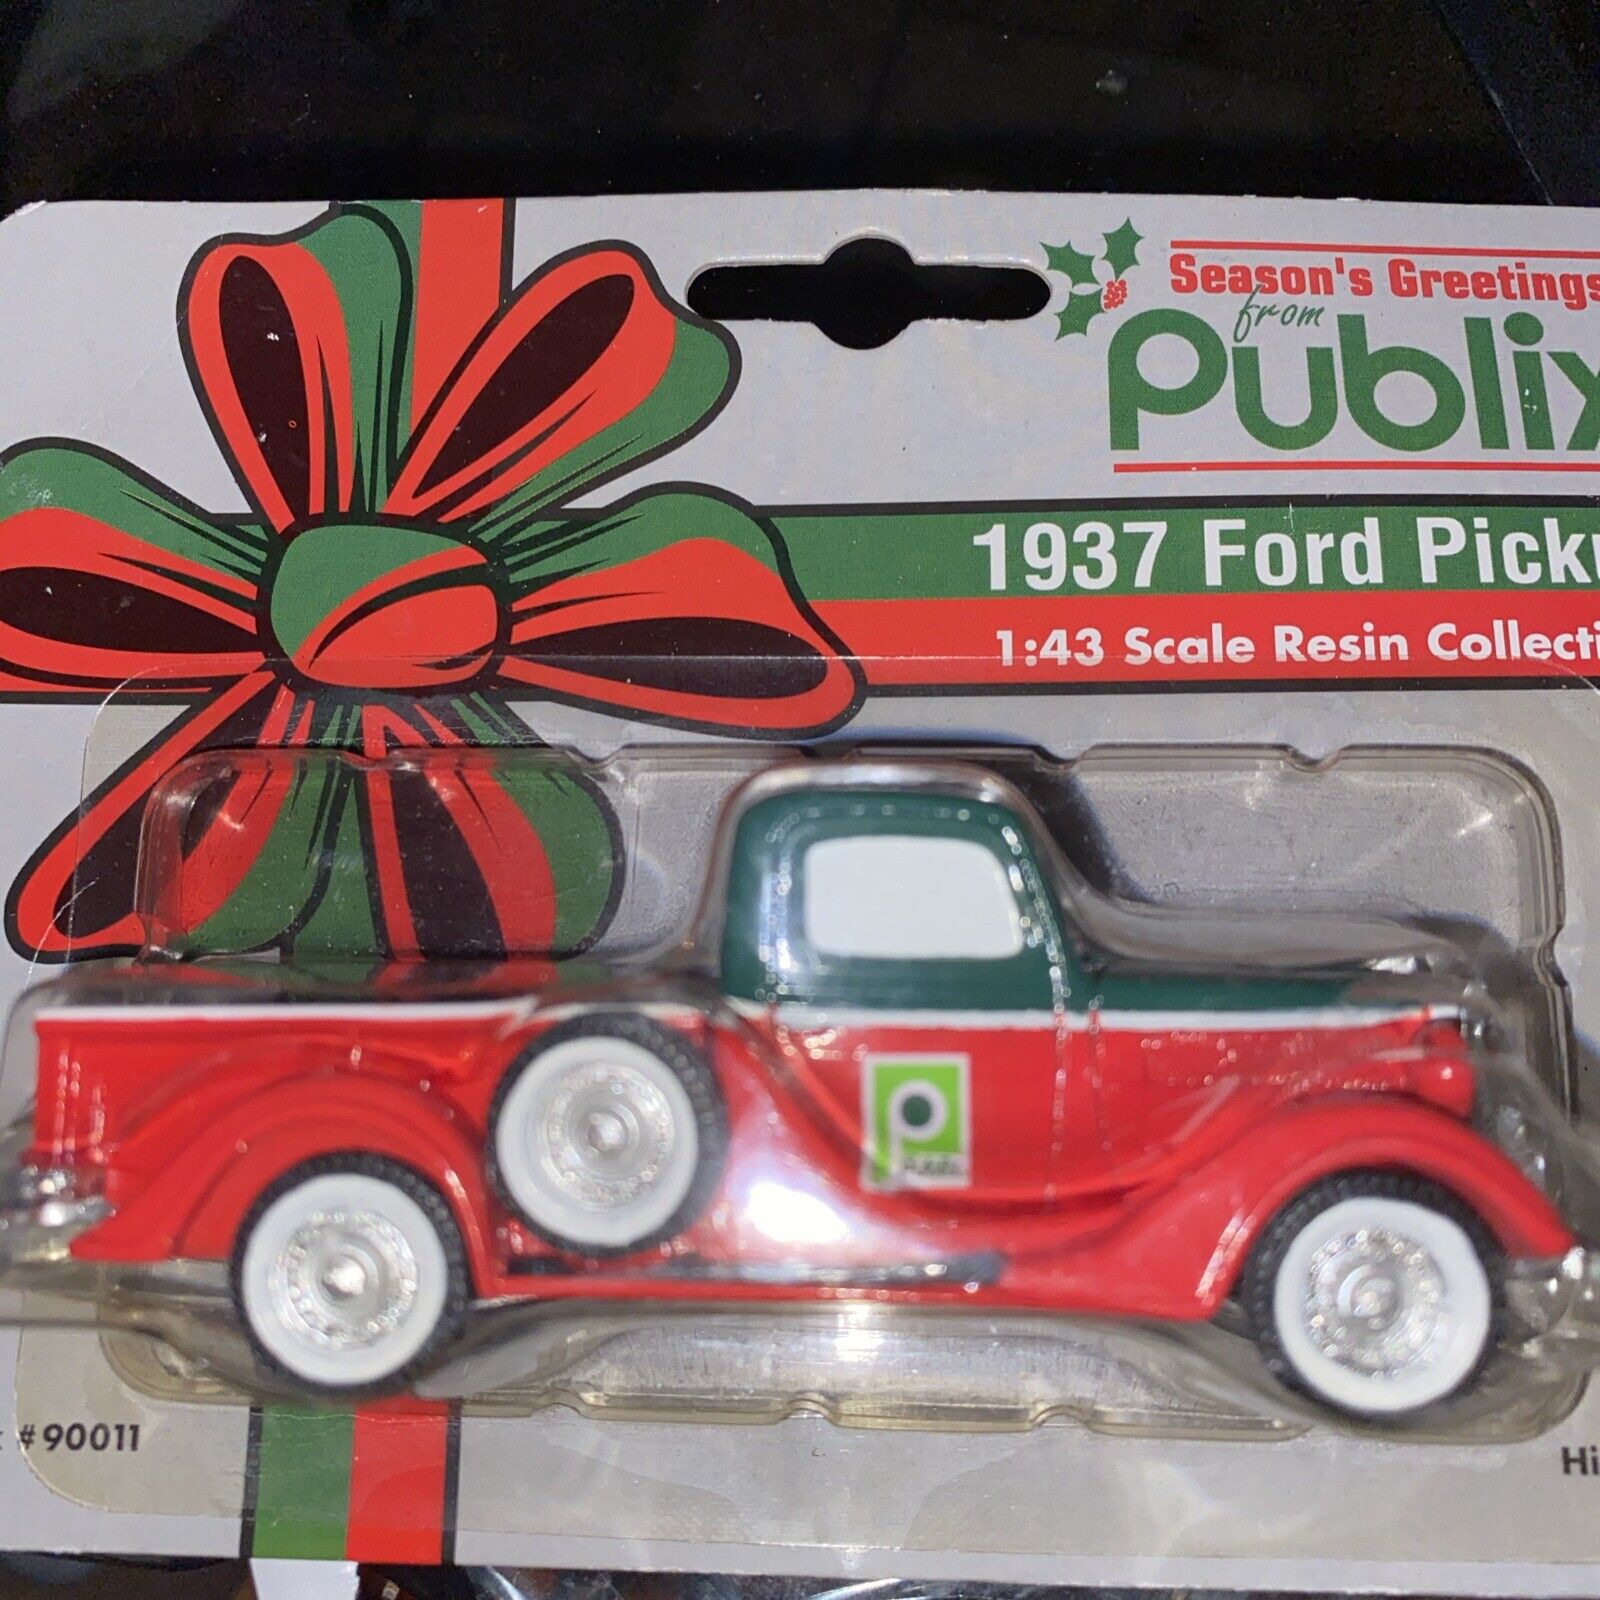 Publix Red 1937 Ford Pick up Season\'s Greetings 1:43 Scale Resin Collectible